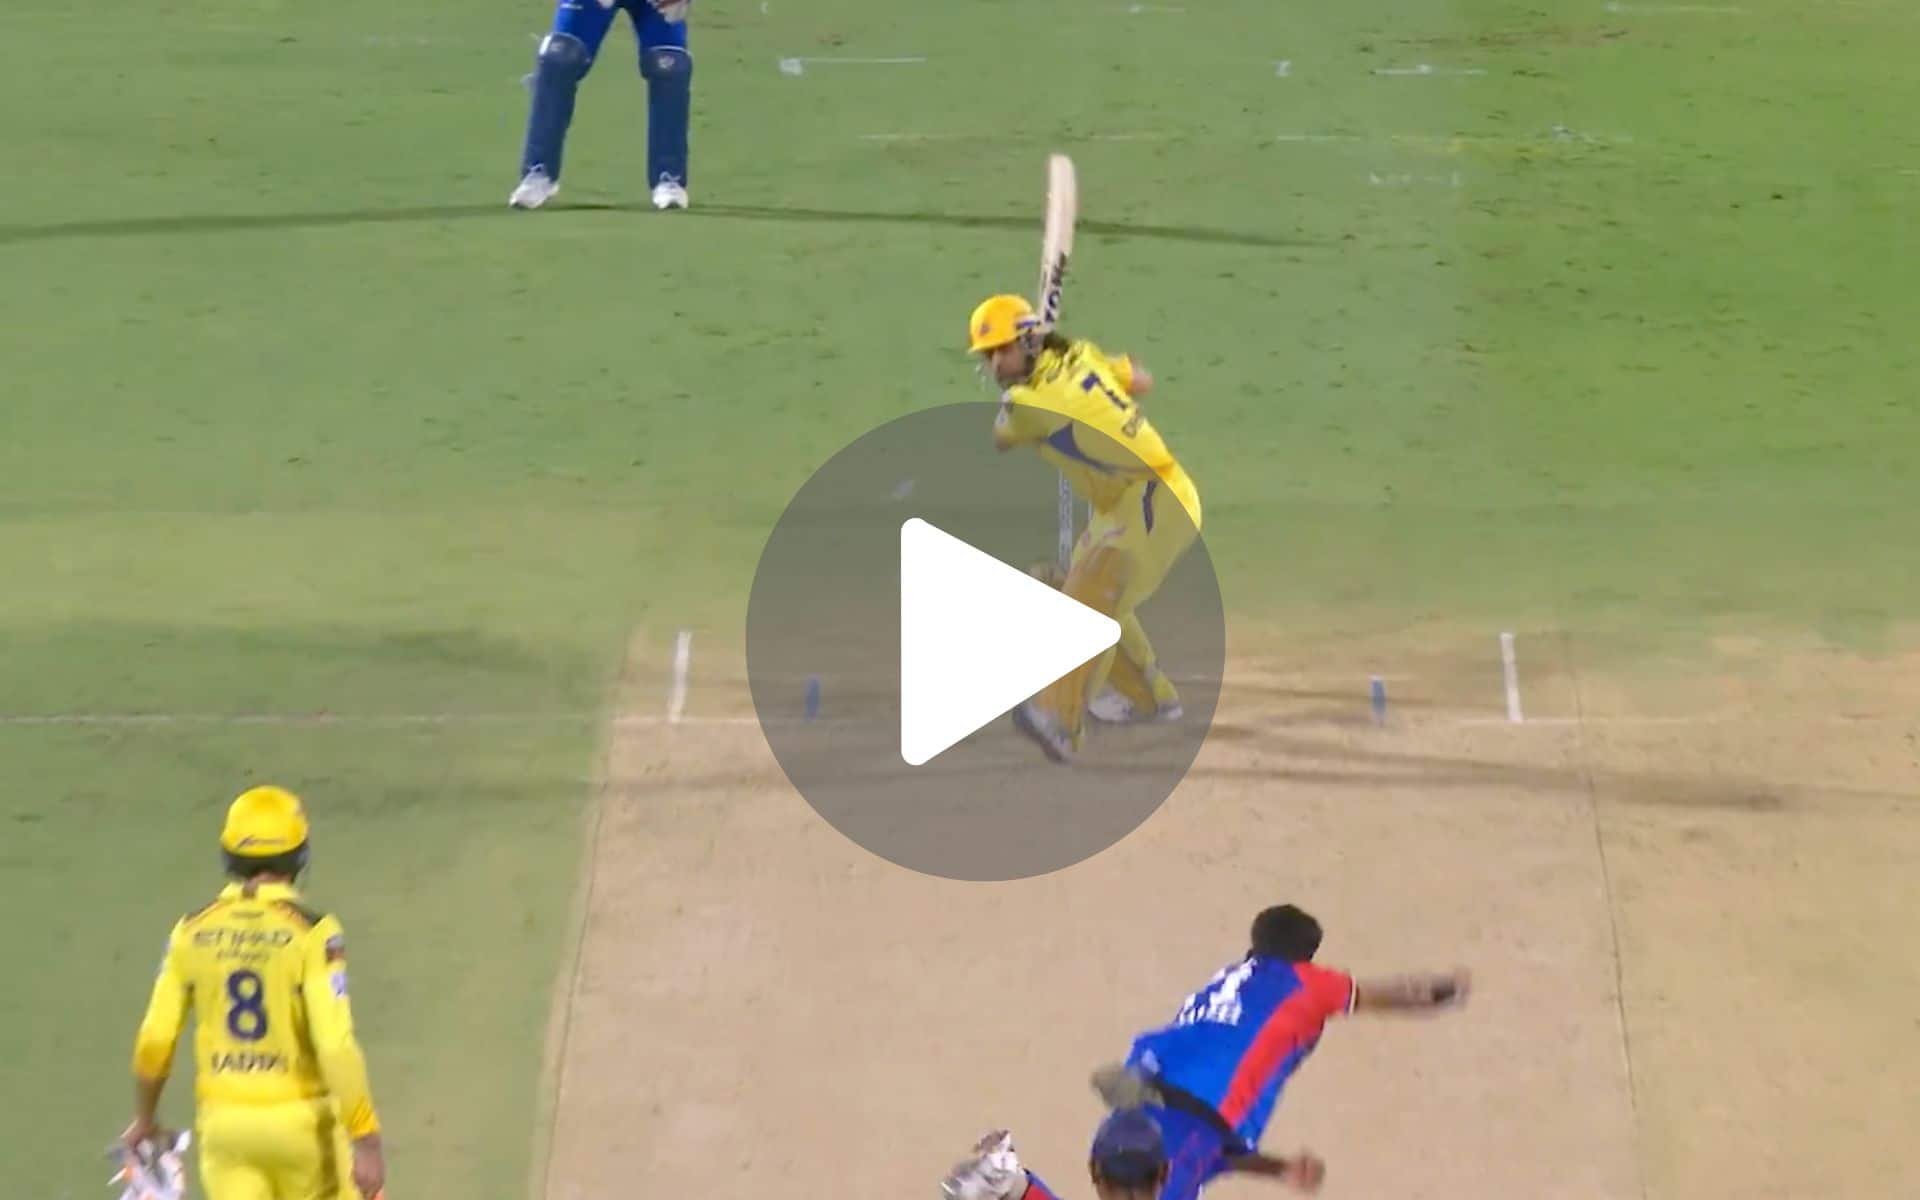 [Watch] MS Dhoni’s Impeccable Six Over Extra Cover Vs. Khaleel Ahmed Makes Fans Nostalgic